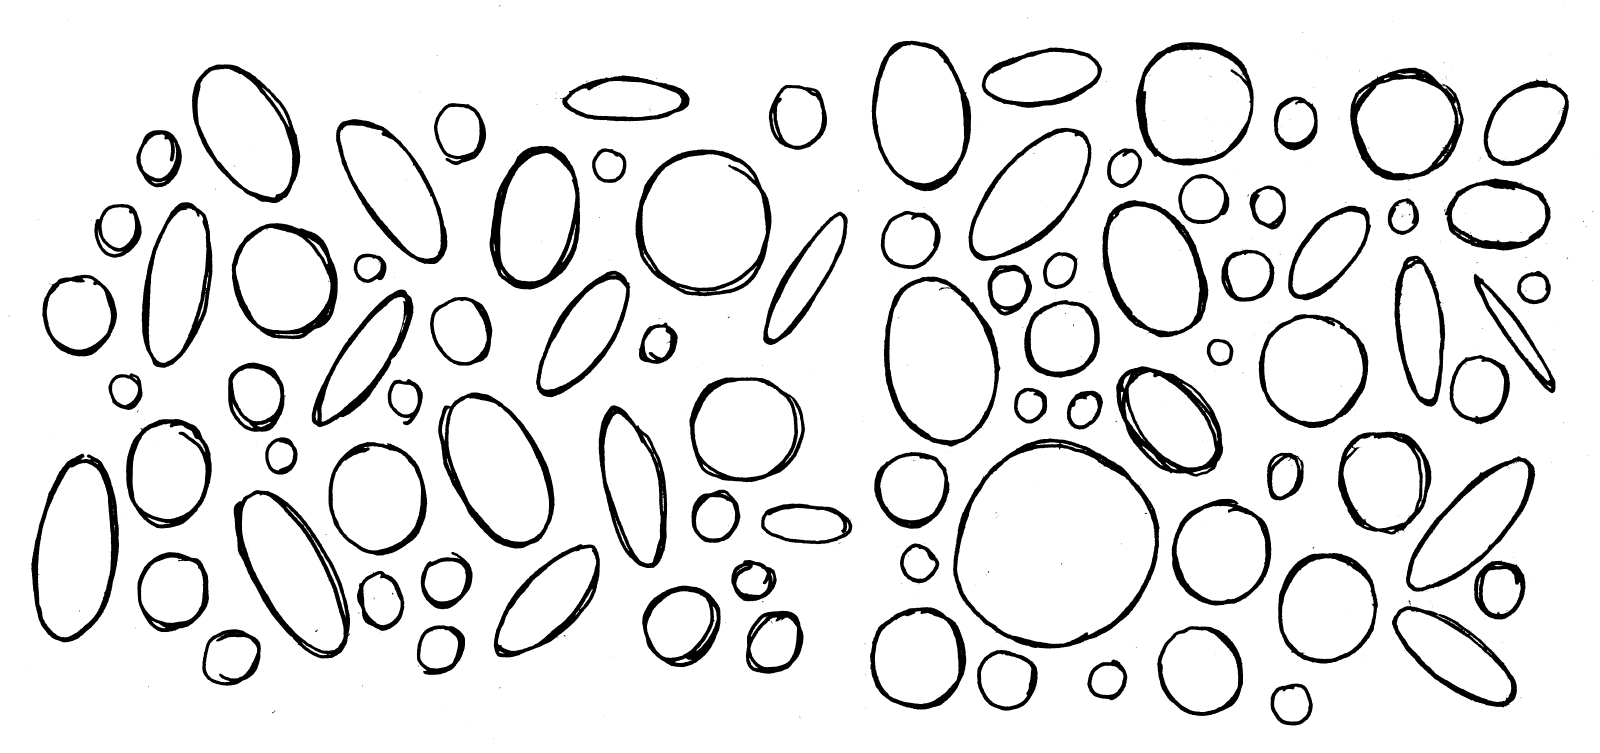 Image of circles and ellipses